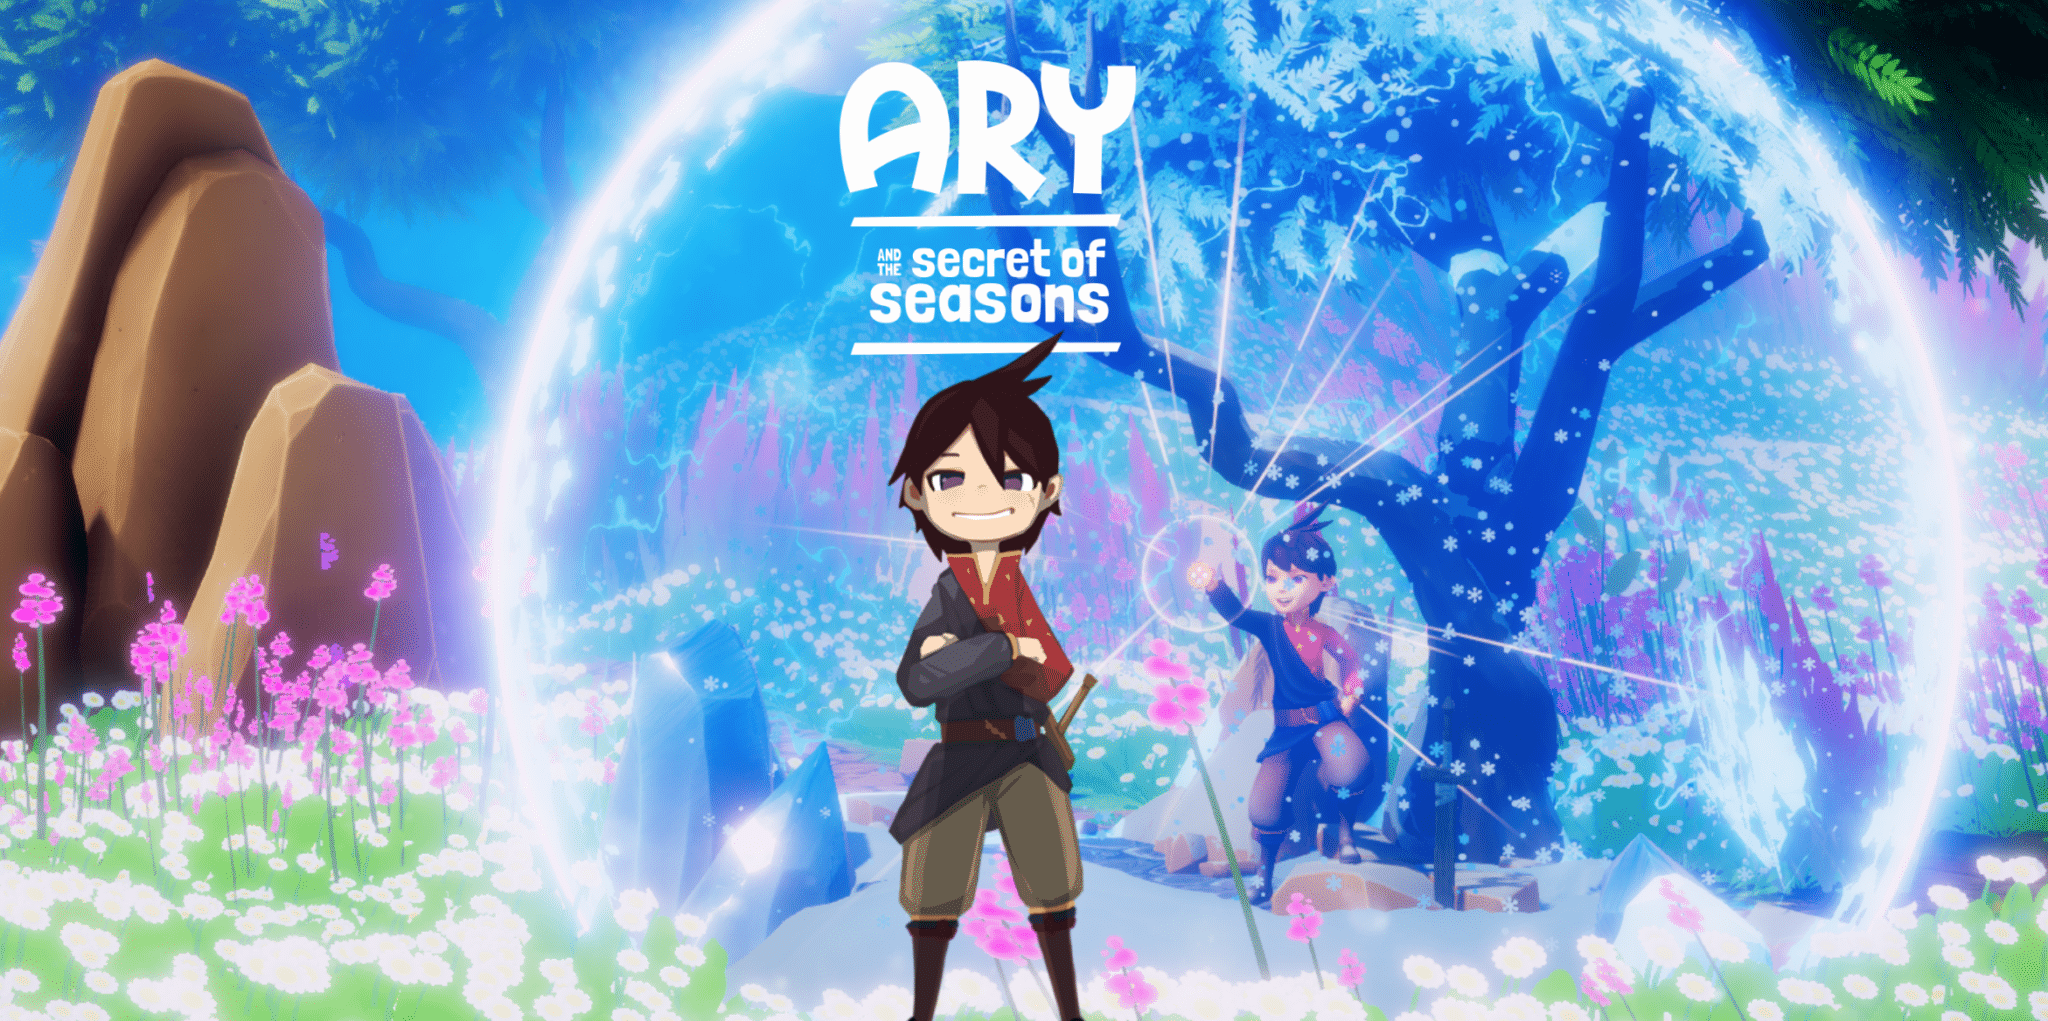 ary and the secret of seasons xbox